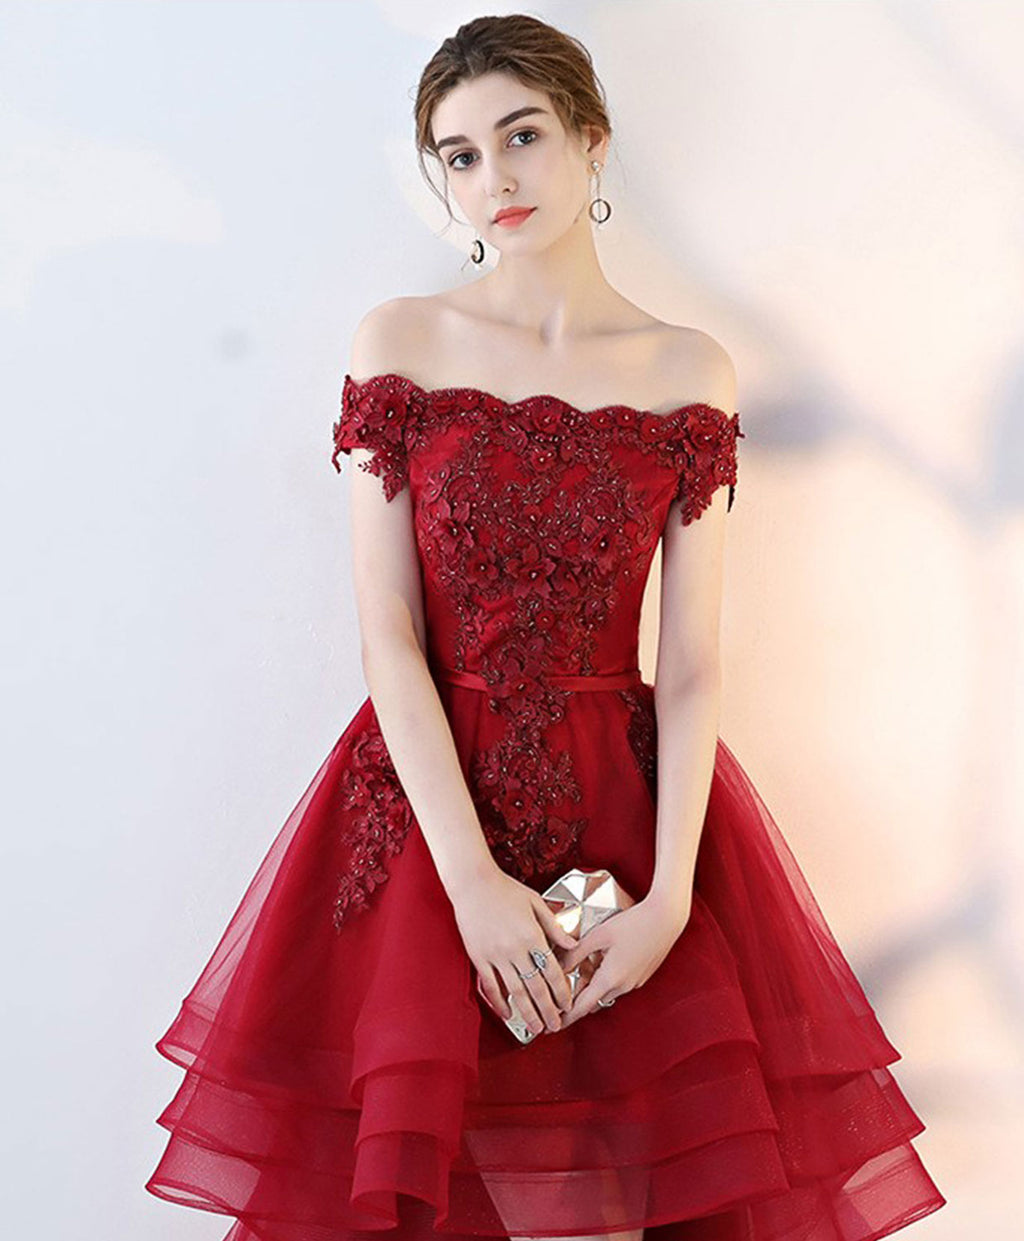 Intriguing Dark Red Lace High-low Cocktail Dress - Promfy